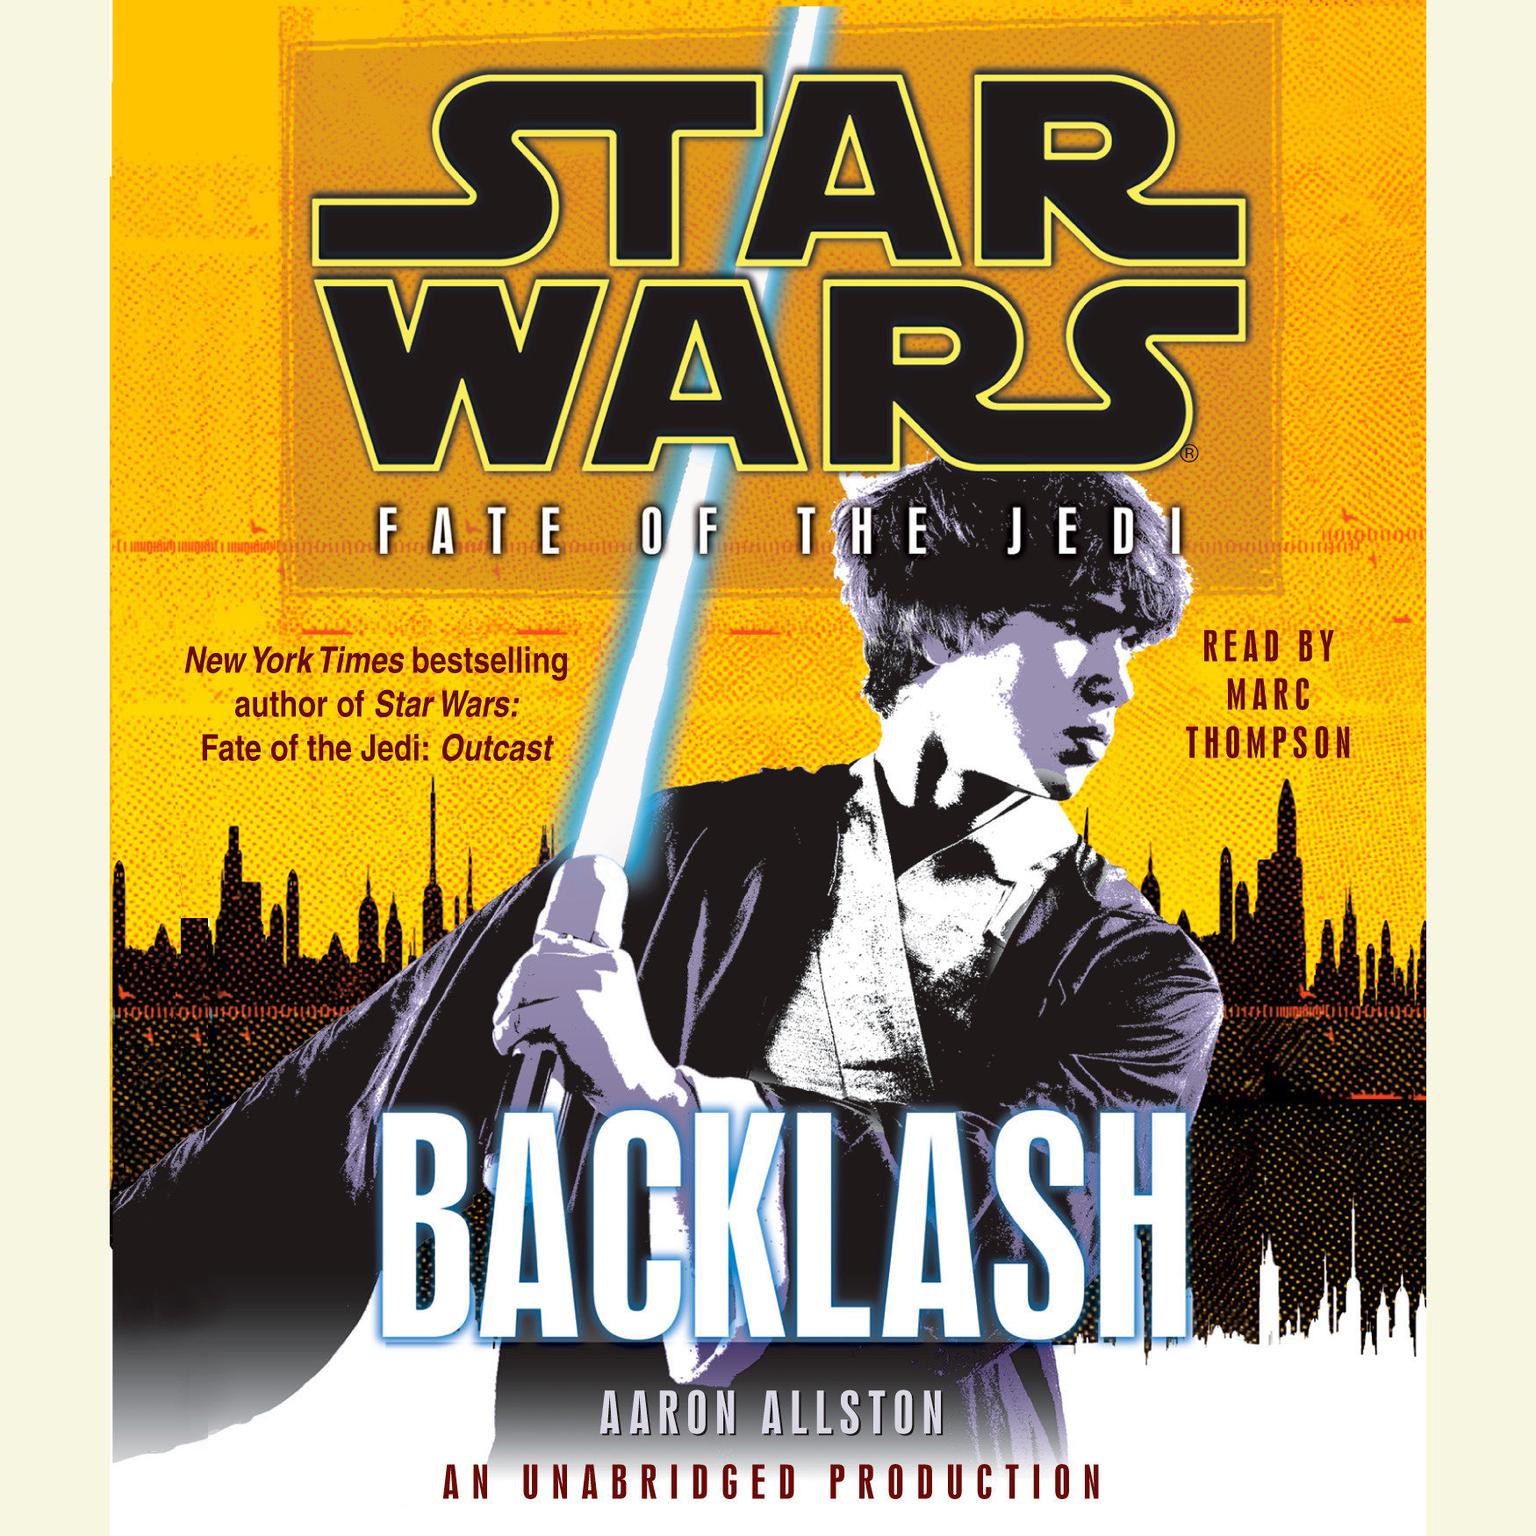 Backlash: Star Wars (Fate of the Jedi) Audiobook, by Aaron Allston